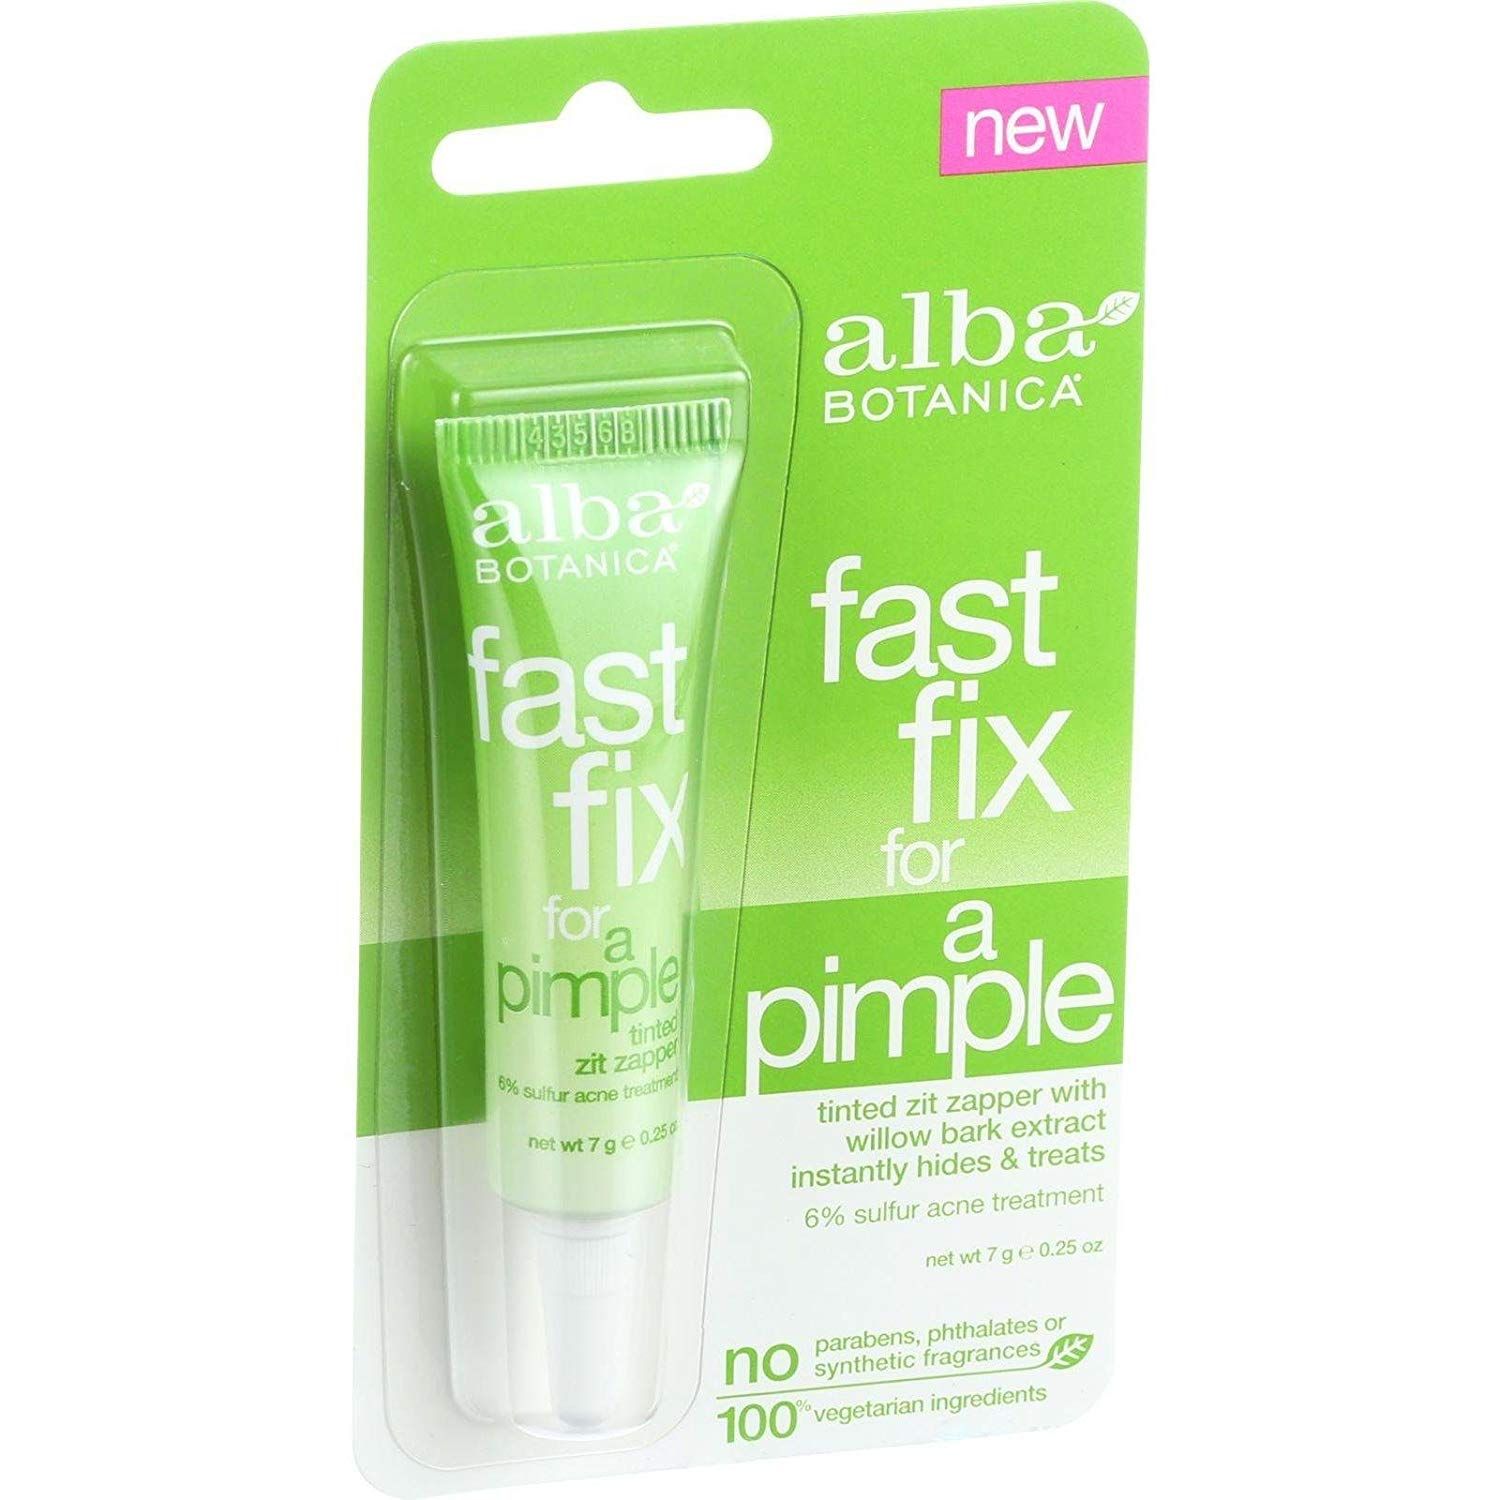 Fast Fix For A Pimple